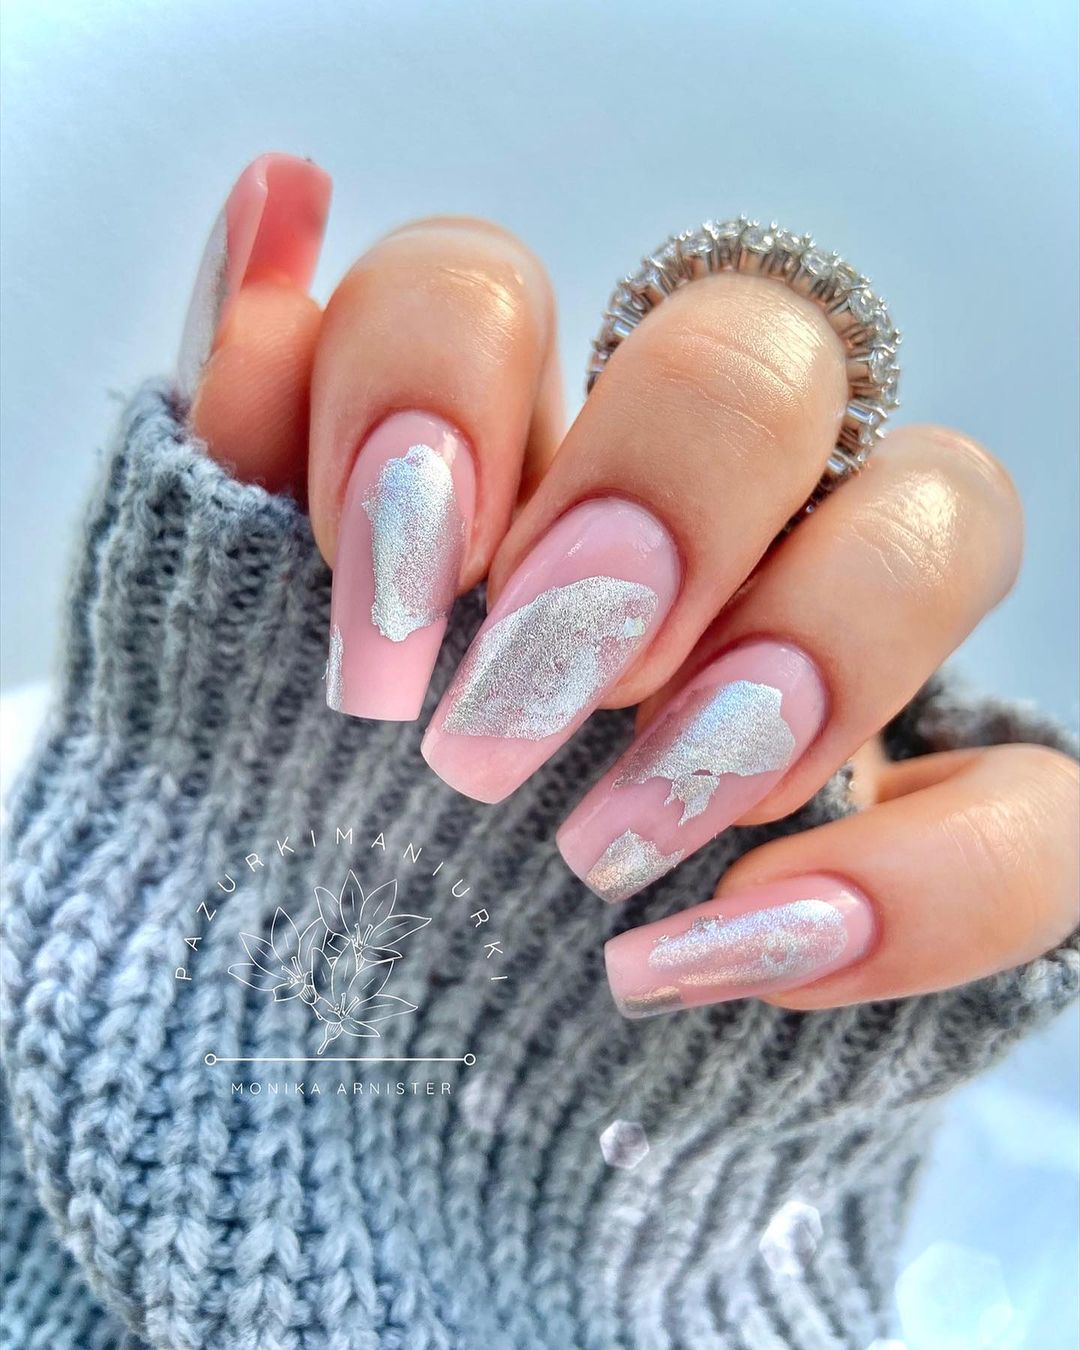 Long Square Pink and Silver Nails